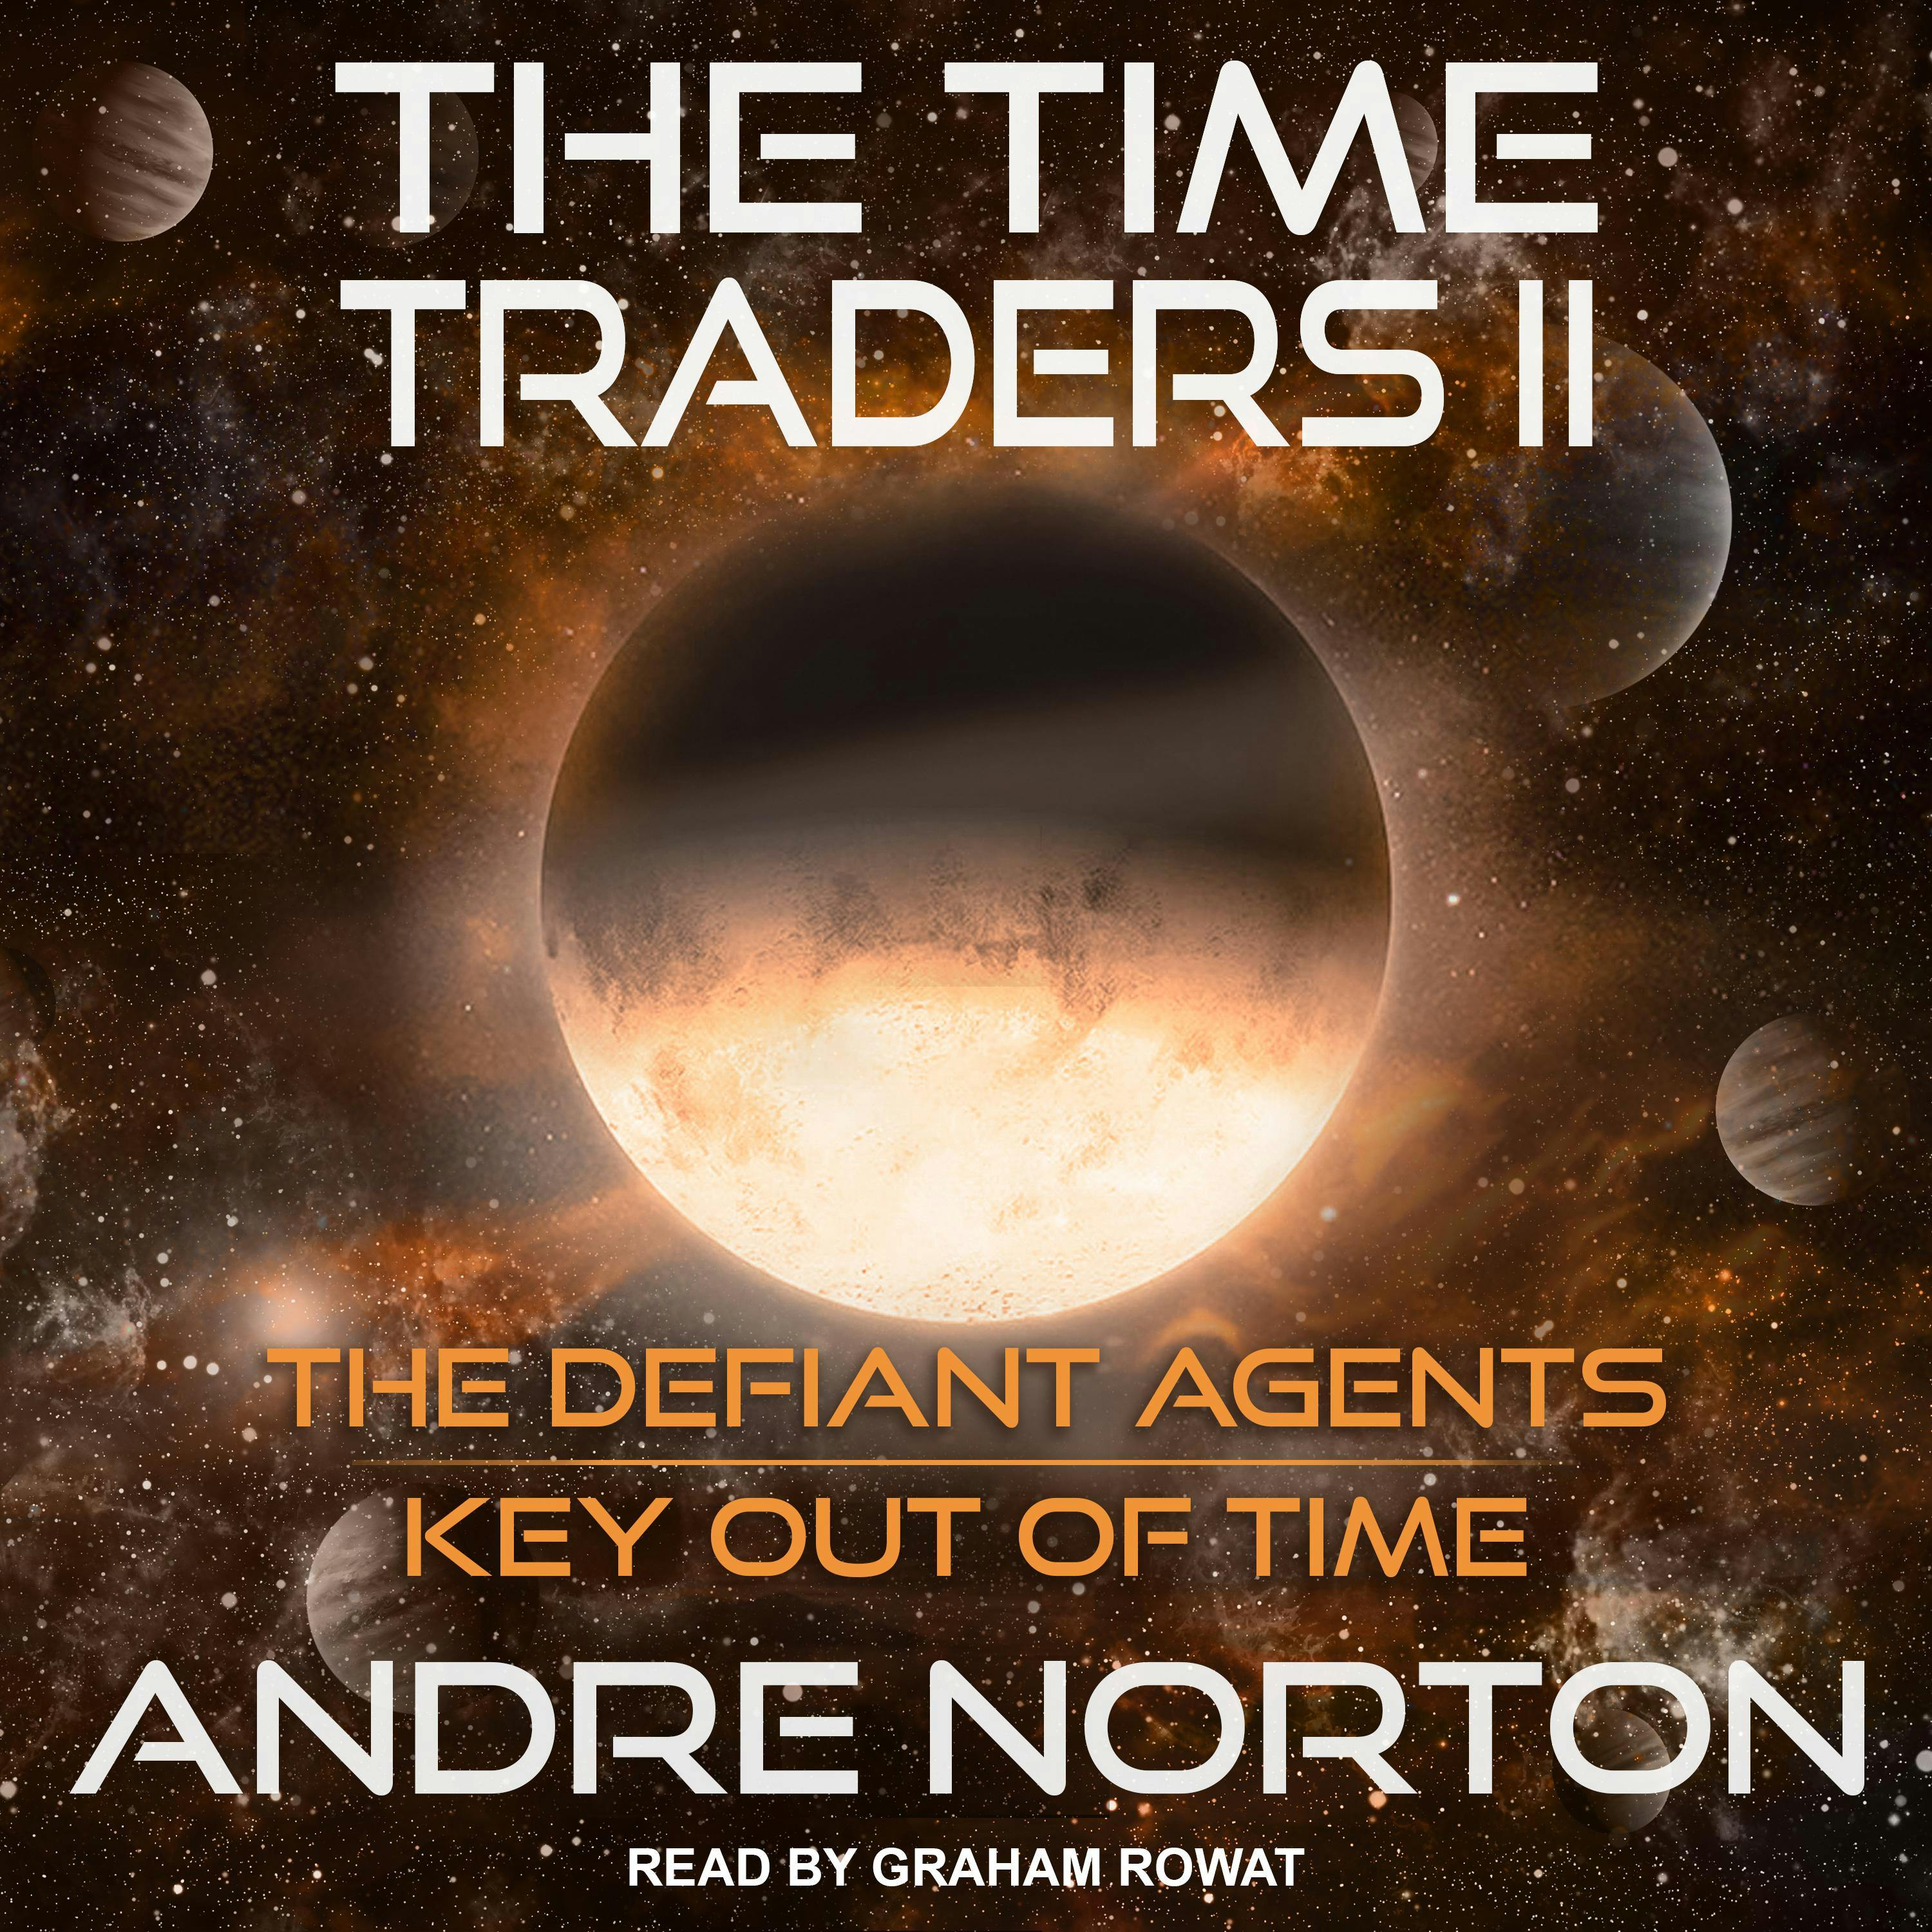 The Time Traders II: The Defiant Agents and Key Out of Time - Andre Norton